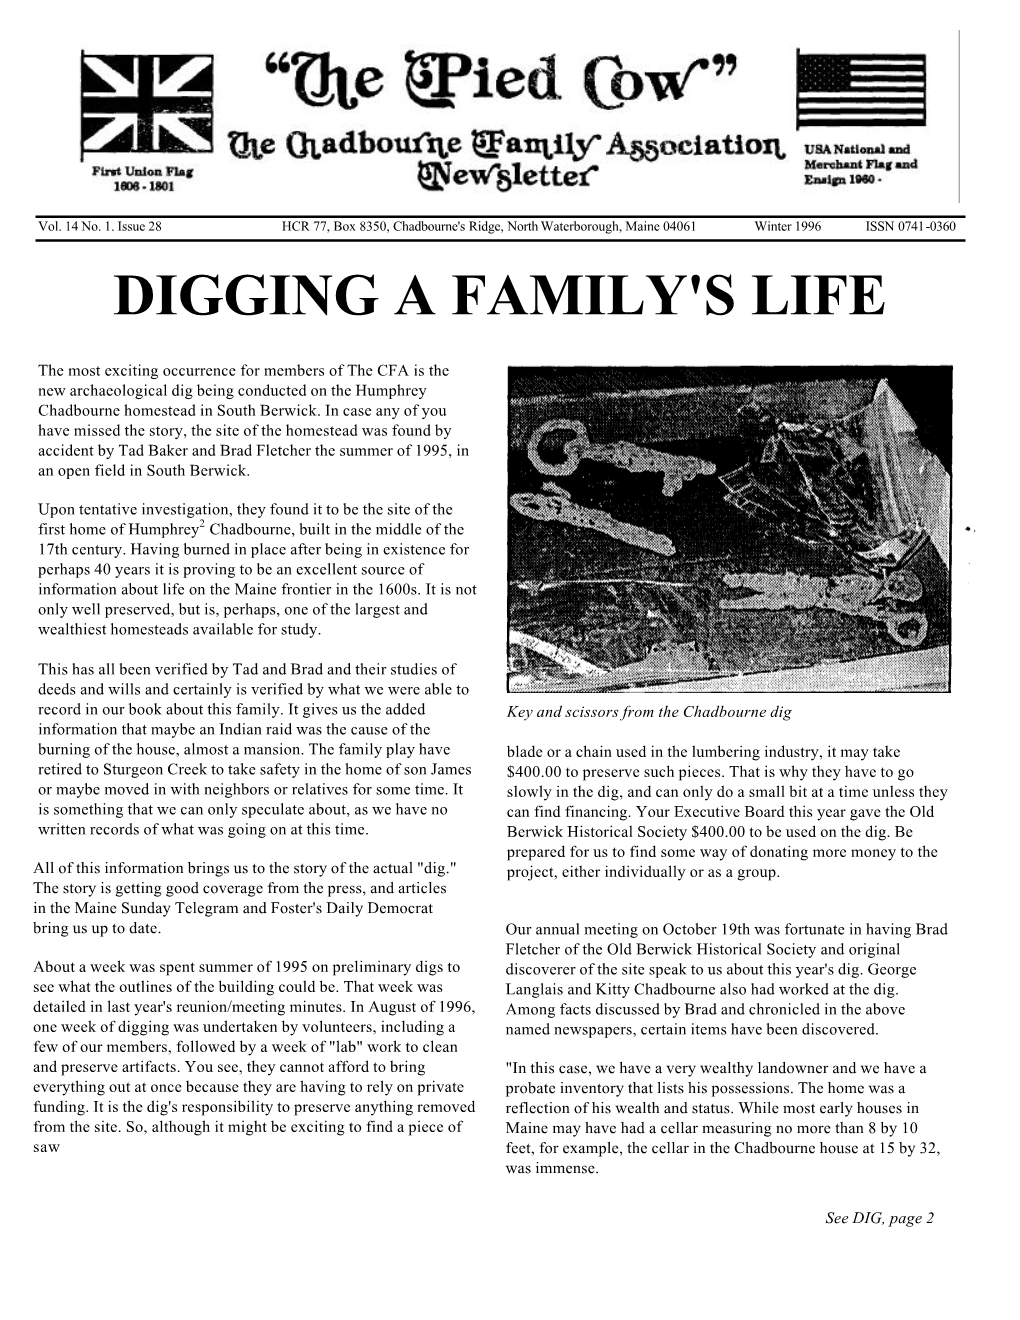 Digging a Family's Life